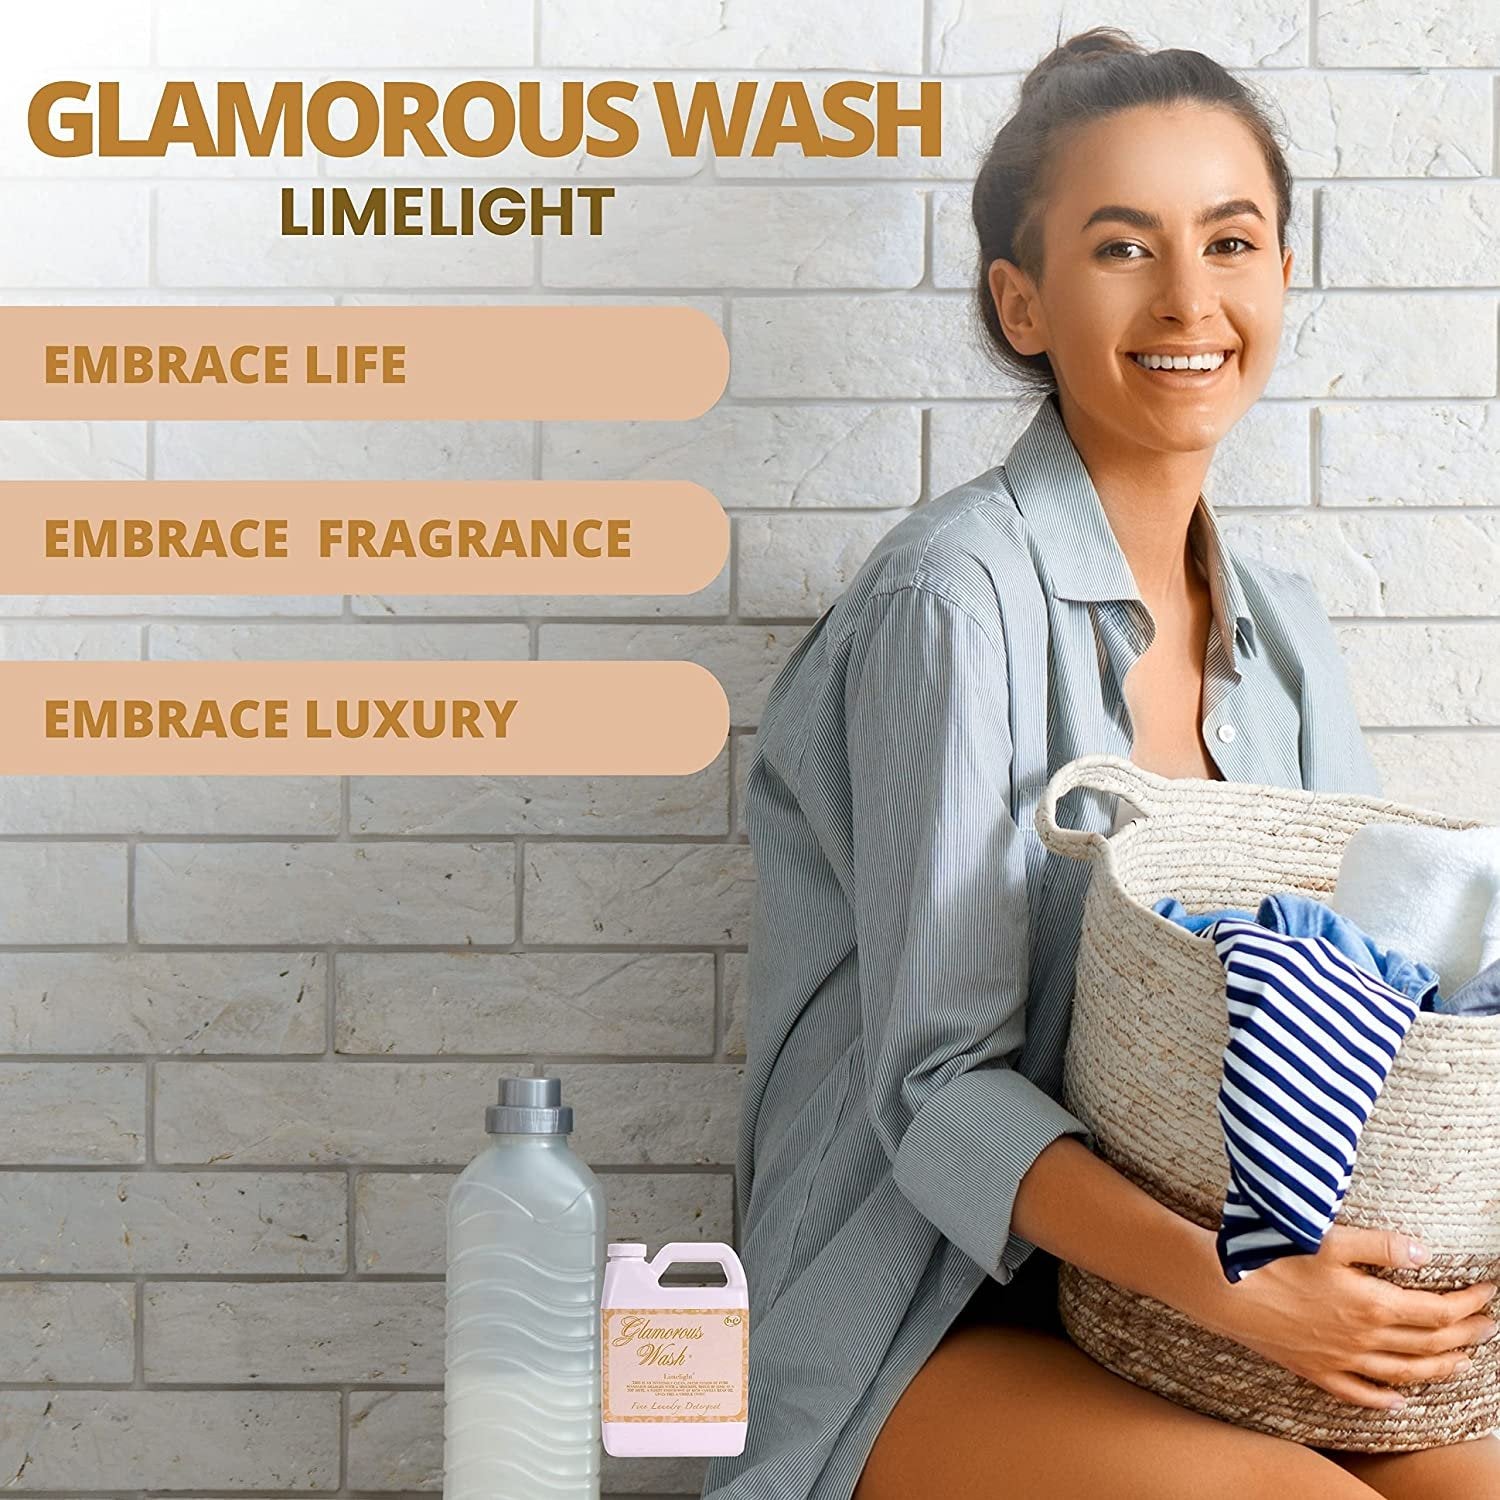 Tyler Candle Company Glamorous Wash Limelight Scent Fine Laundry Liquid Detergent - Liquid Laundry Detergent for Clothing - Hand and Machine Washable - 32 oz, 907-gram Container with Bonus Key Chain